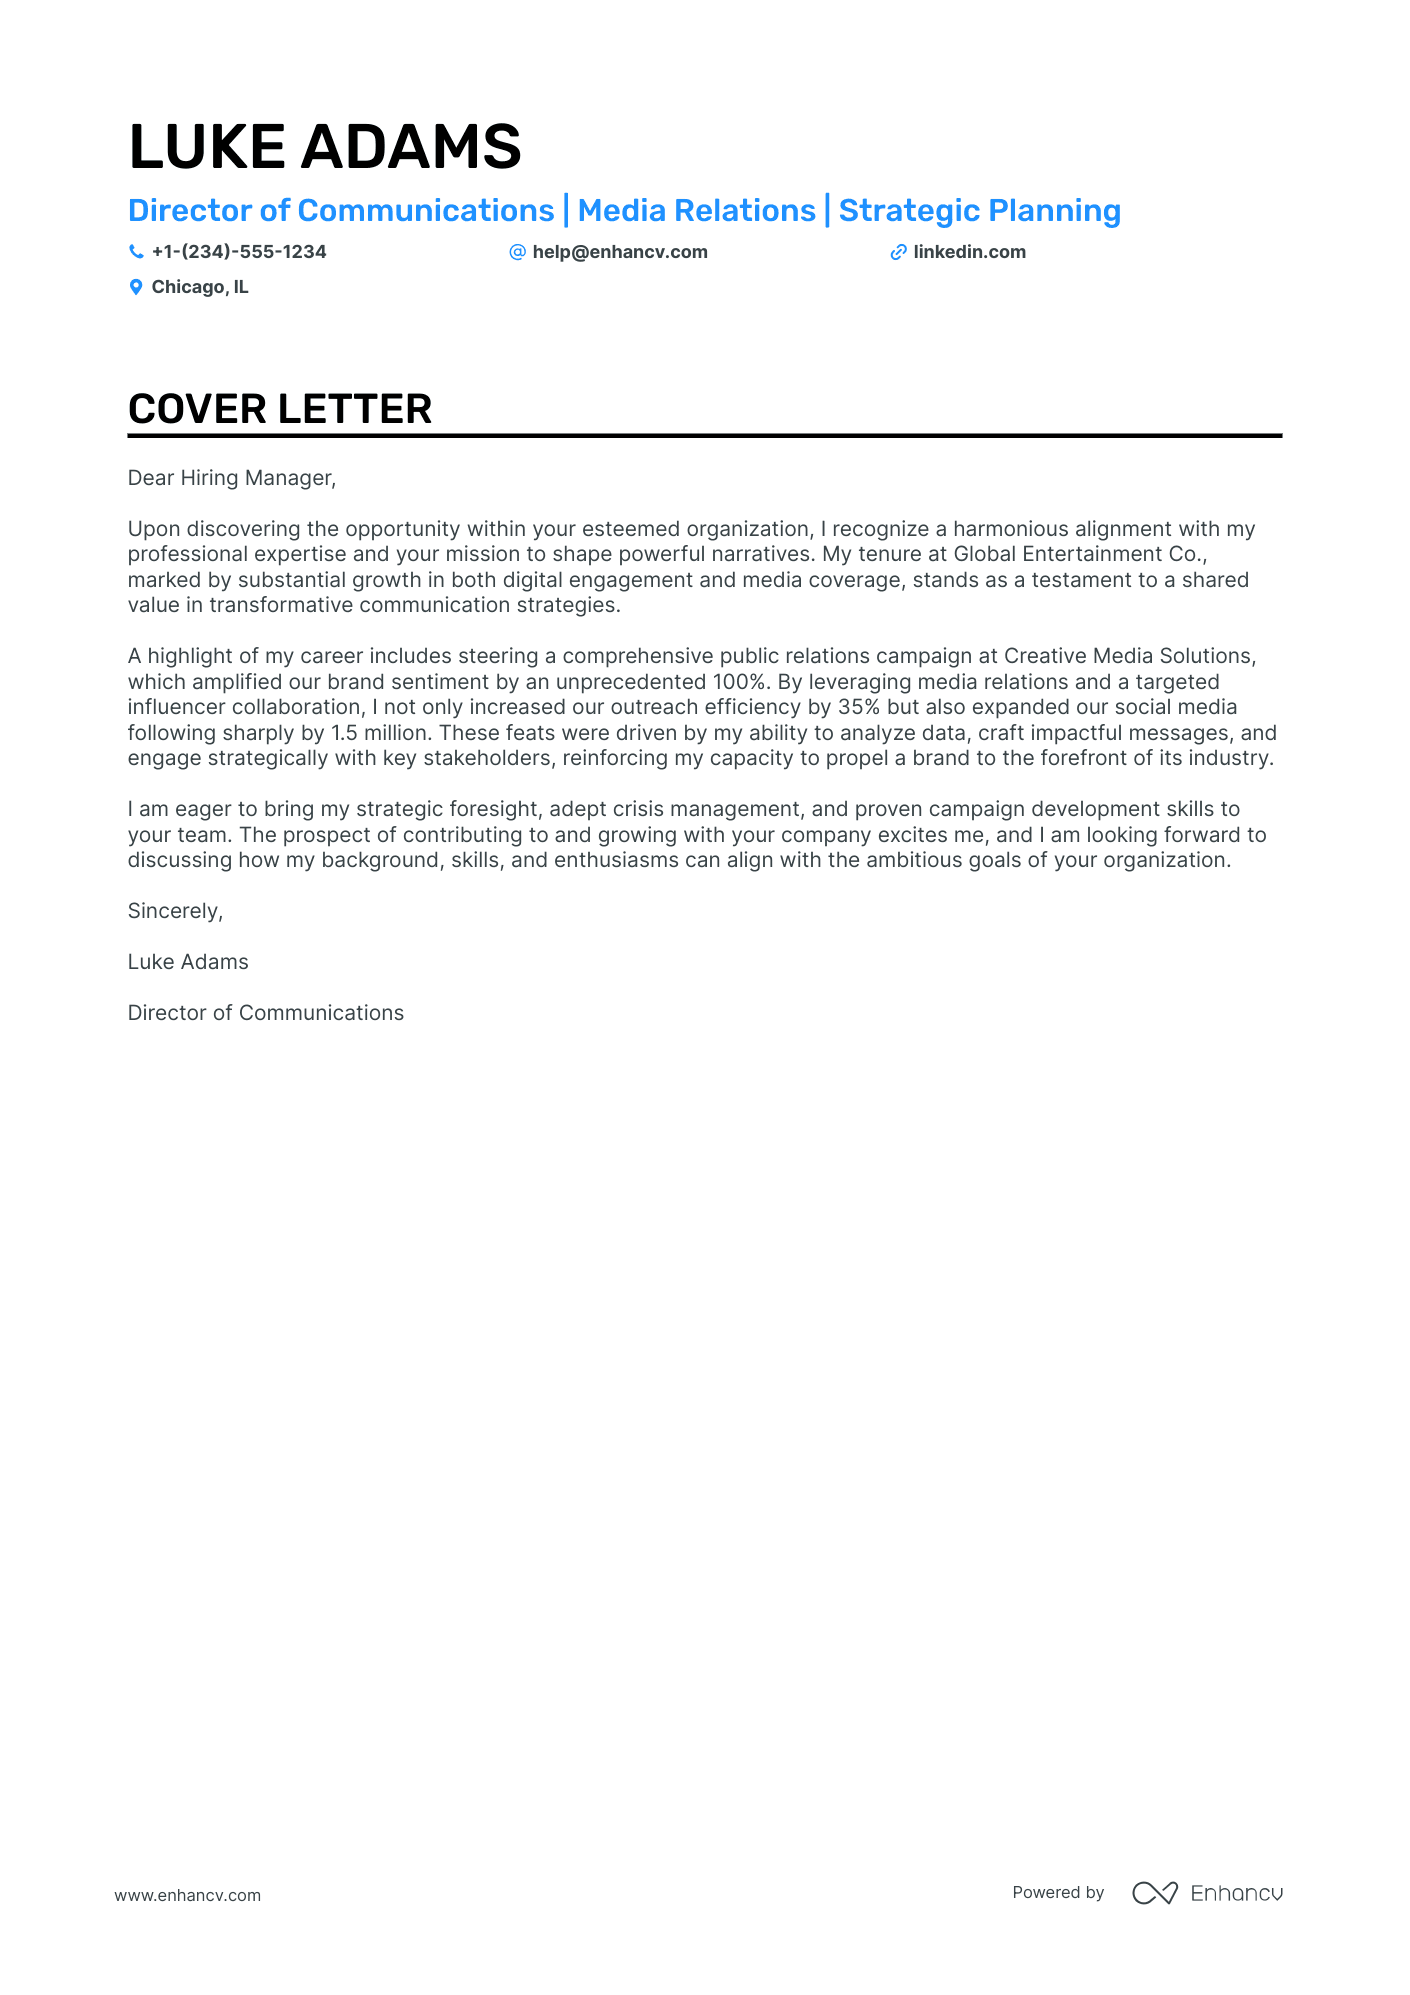 Director of Communications cover letter